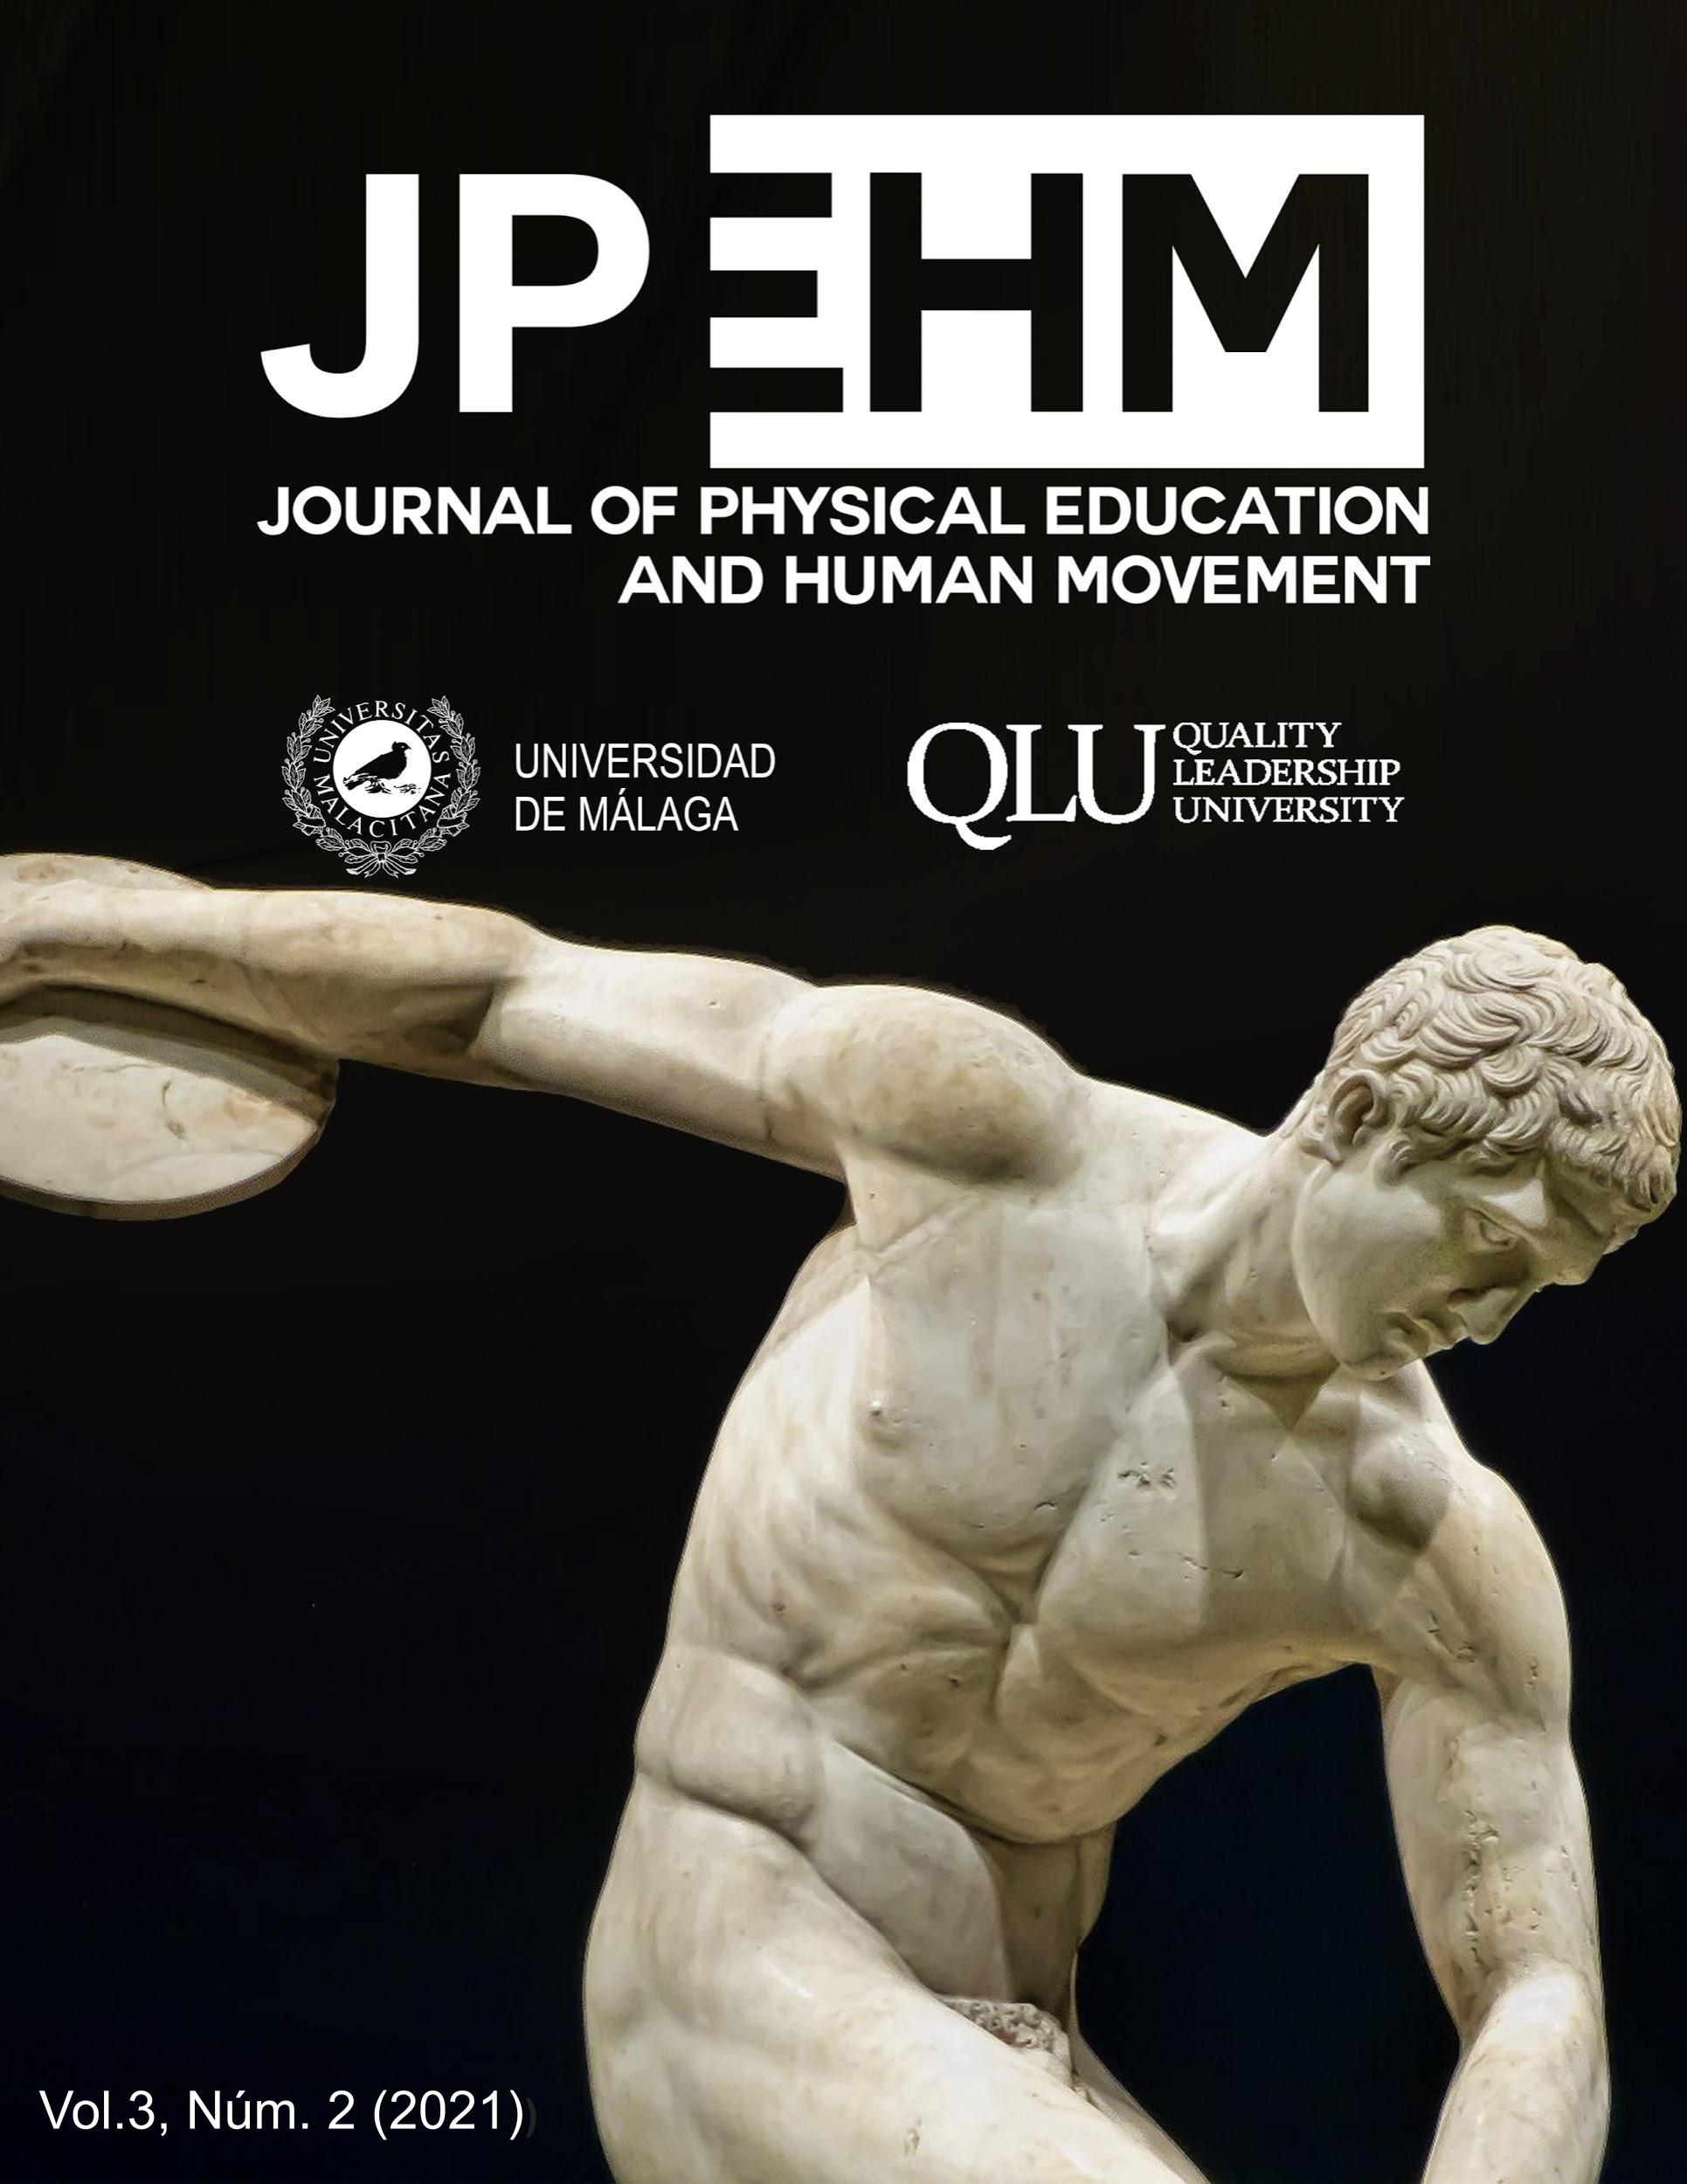 					Ver Vol. 3 Núm. 2 (2021): Journal of physical education and human movement
				